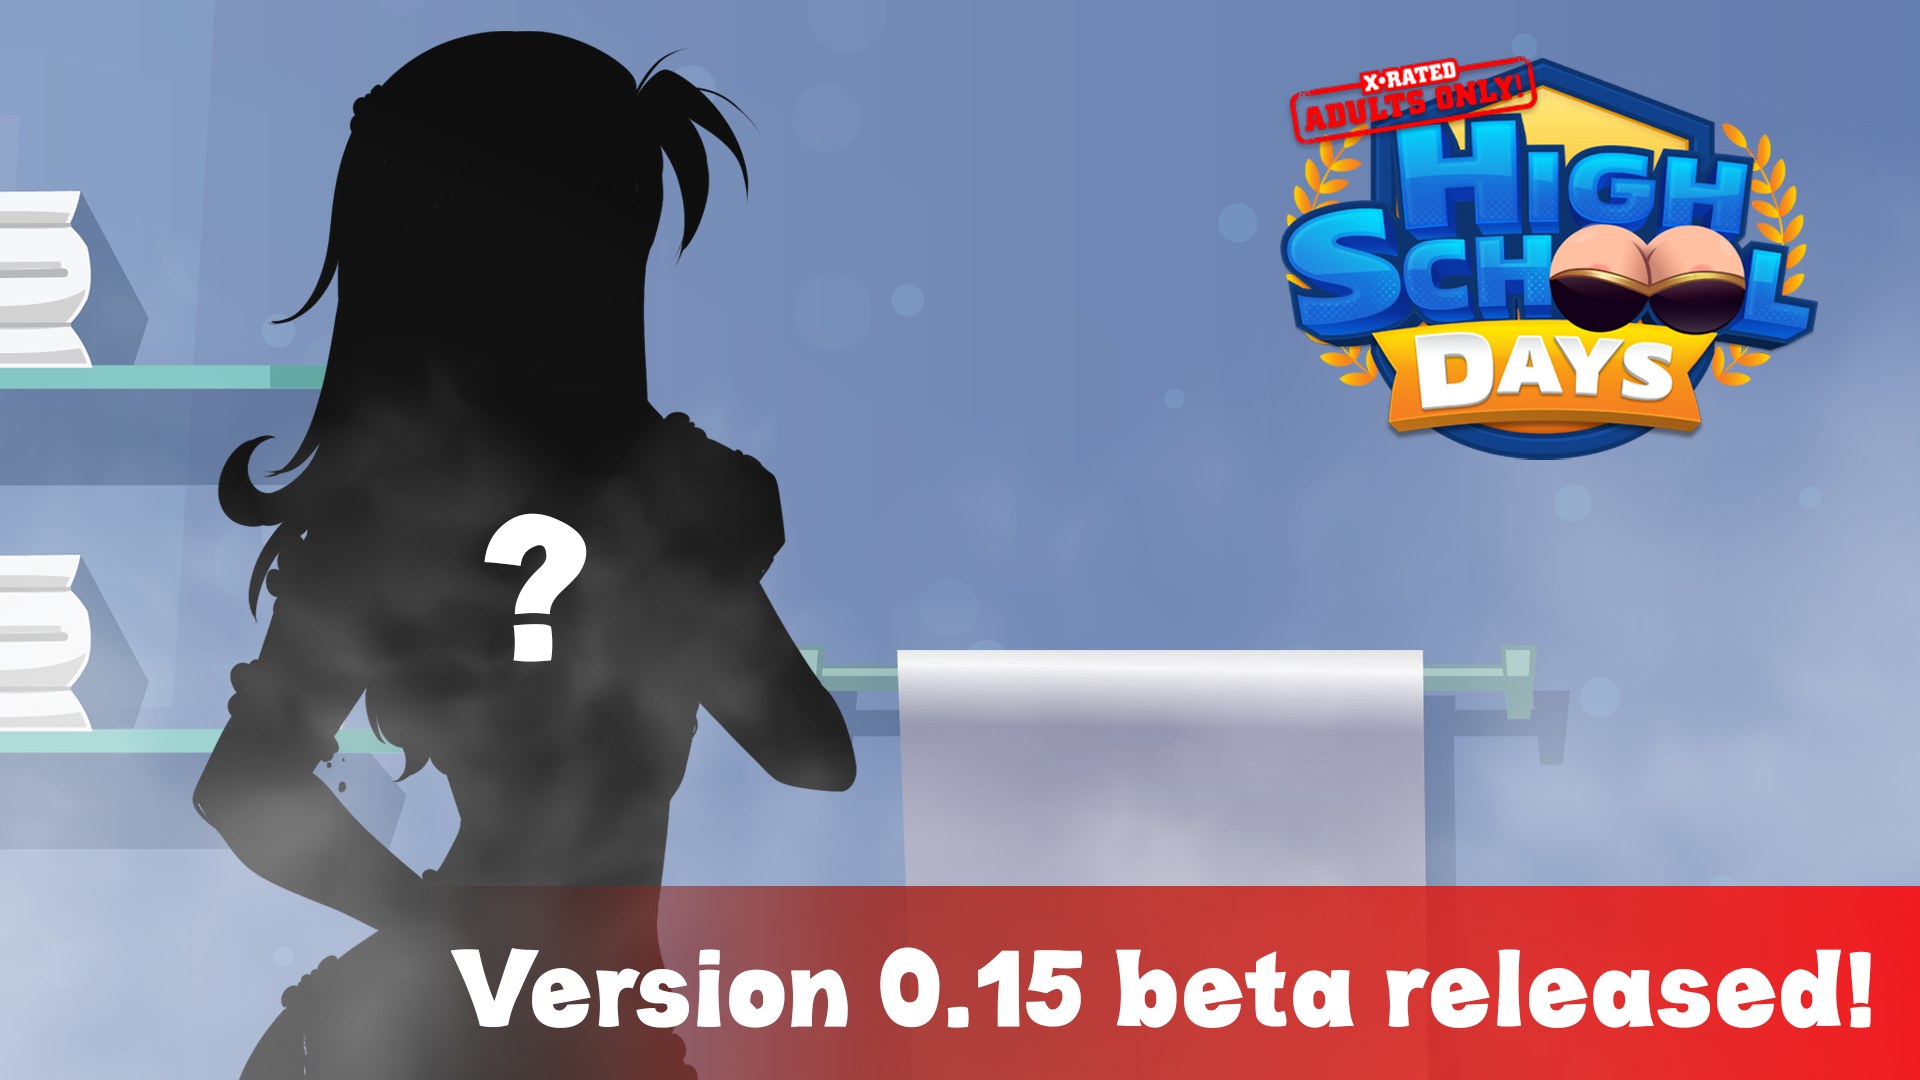 Version 0.15 beta is out!